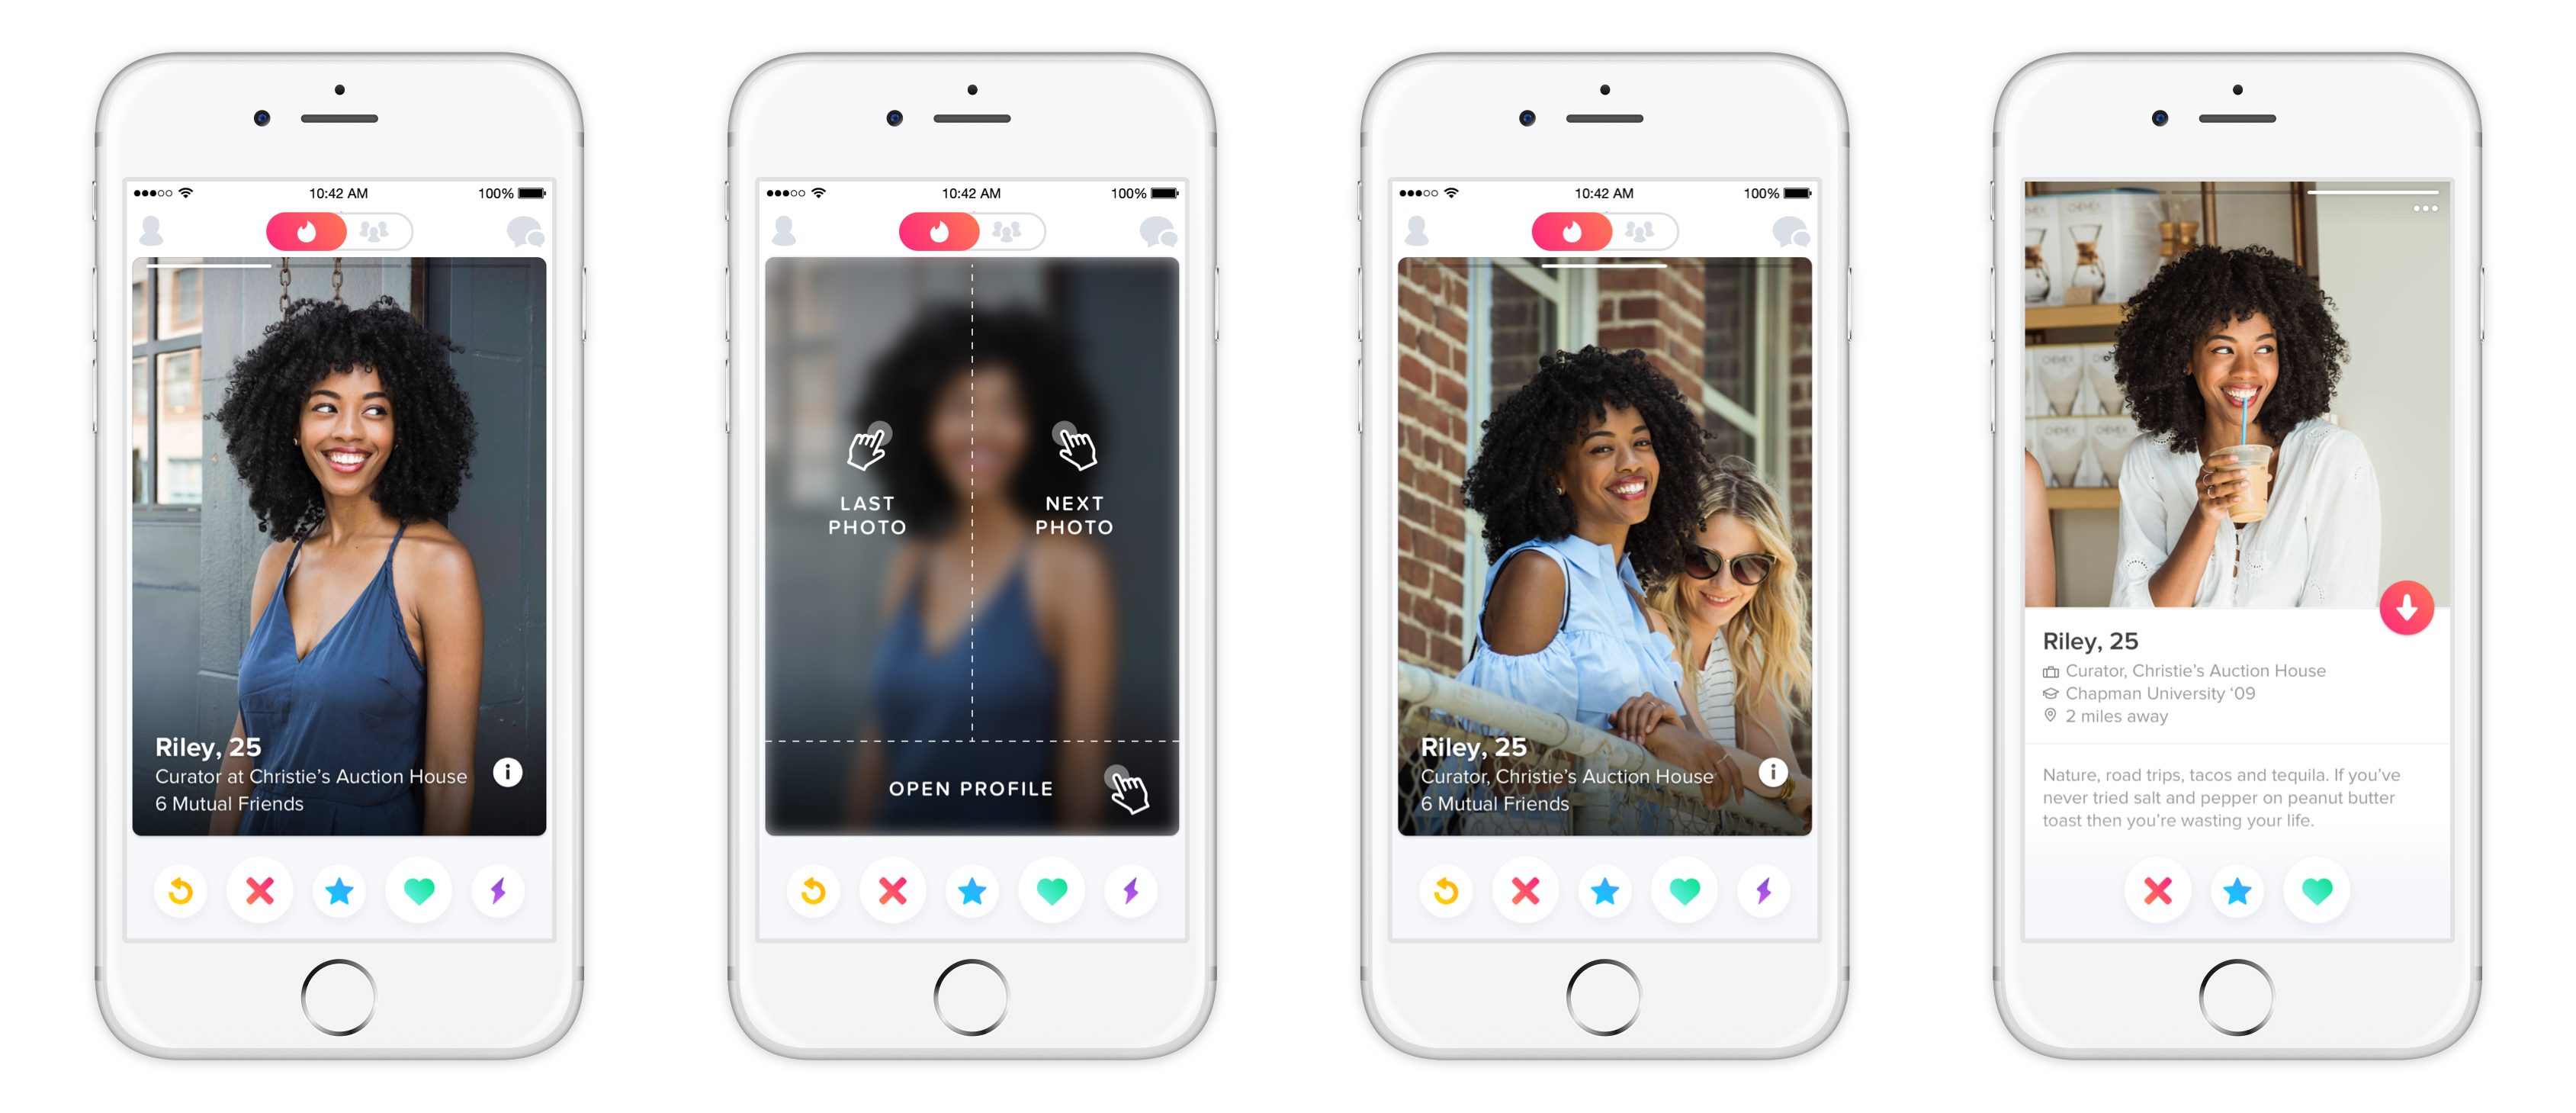 Released in September 2012, dating app Tinder allows users to select their ...